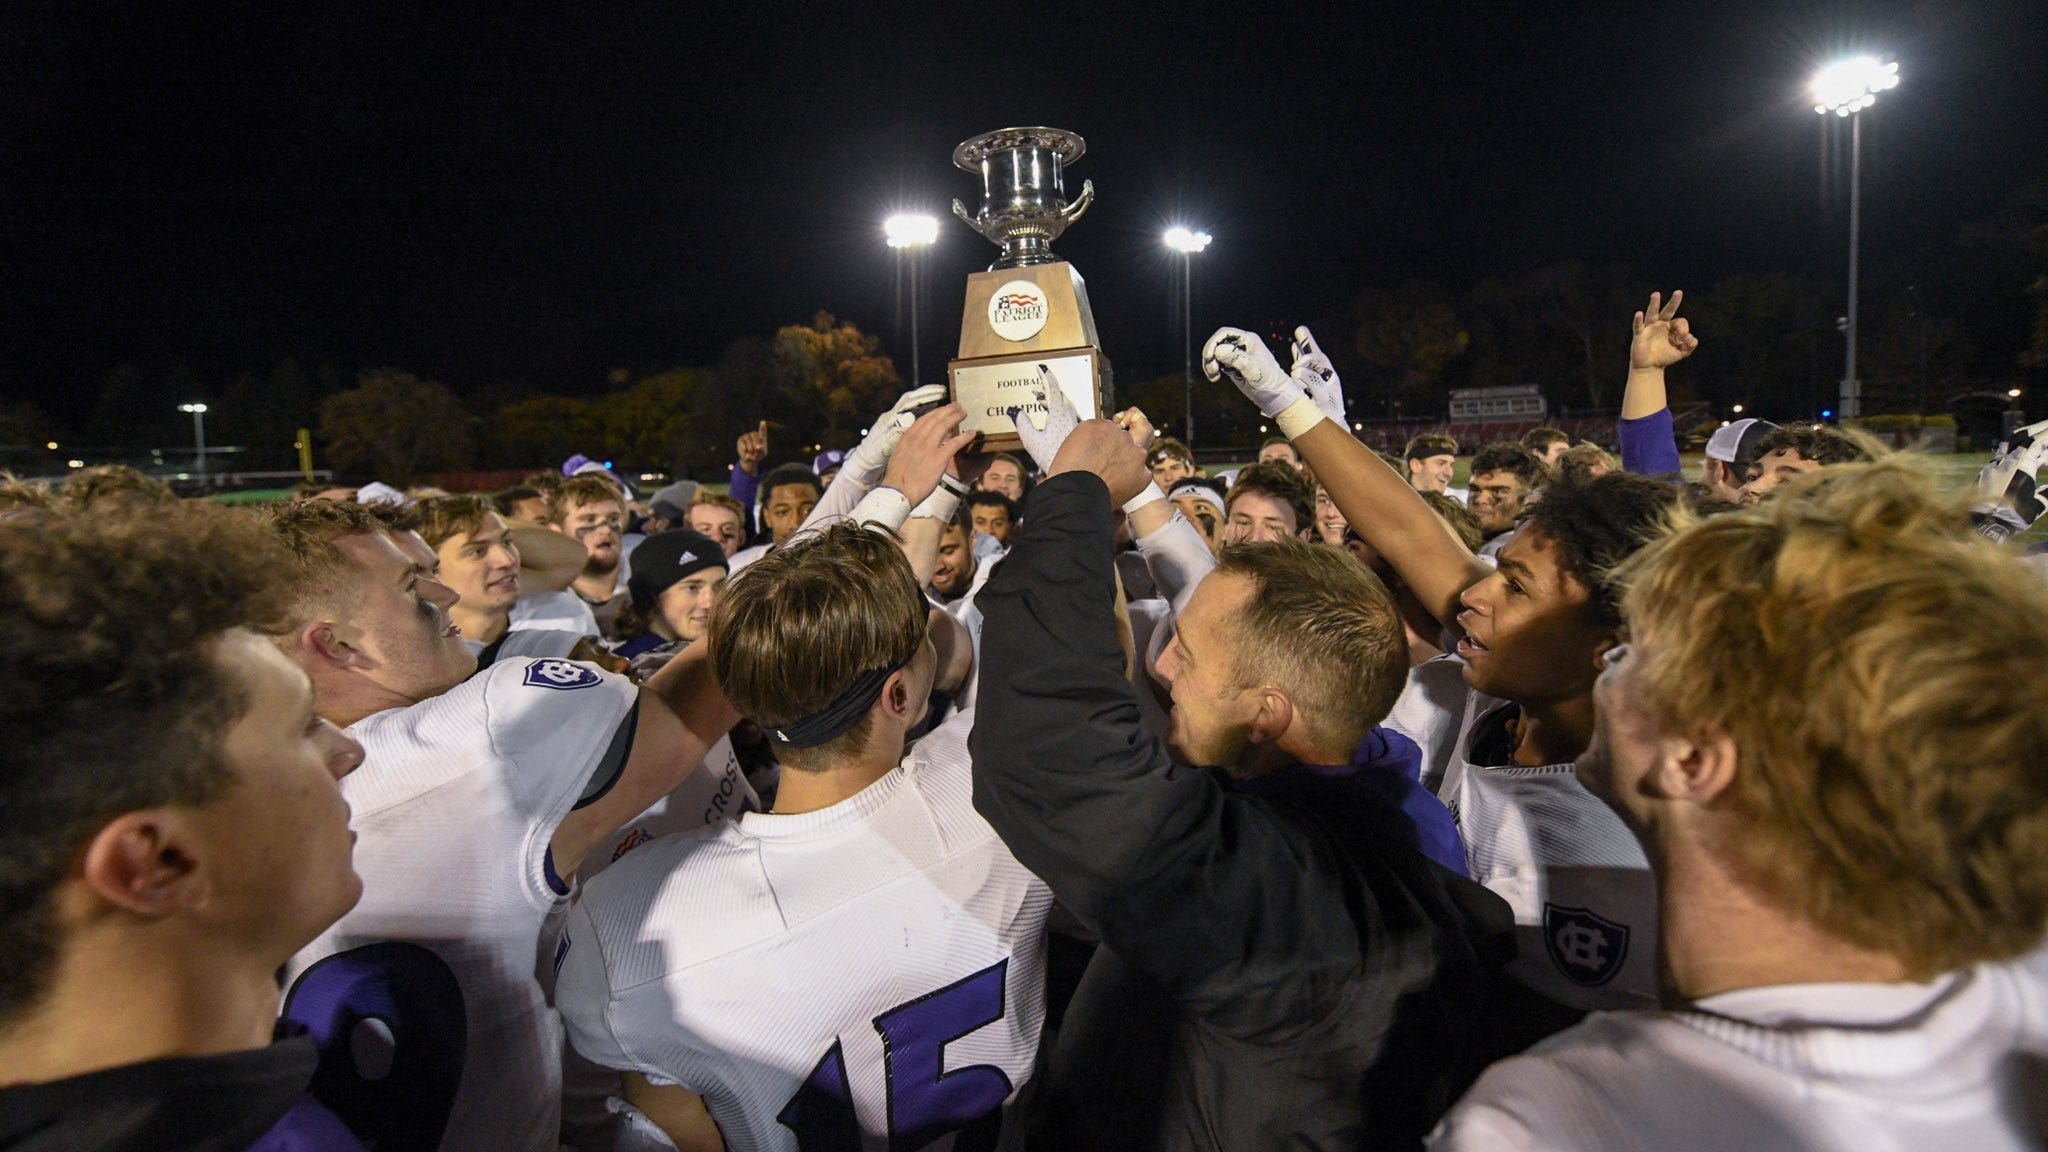 Big Second Half Propels Holy Cross To Another Patriot League Crown